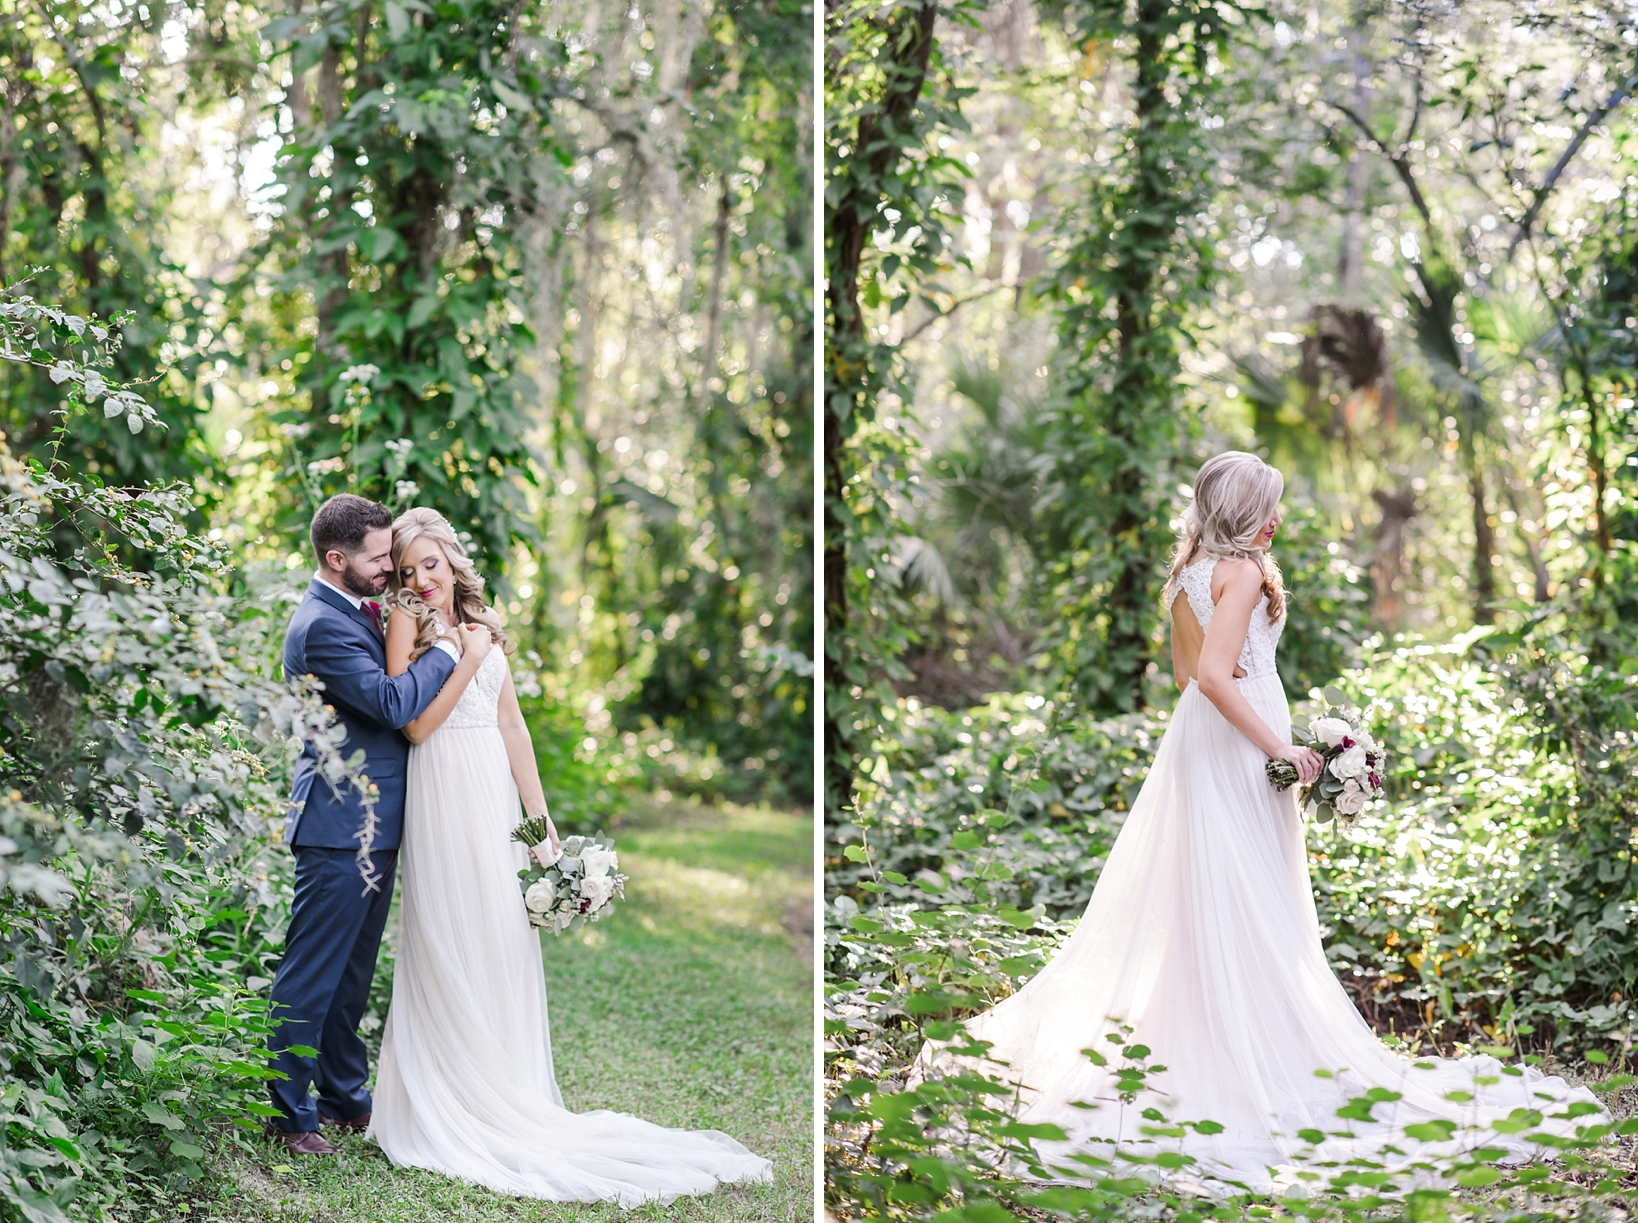 Beautiful garden portraits of the bride and groom at Bakers Ranch in Parrish, Fl by Sarah and Ben Photography